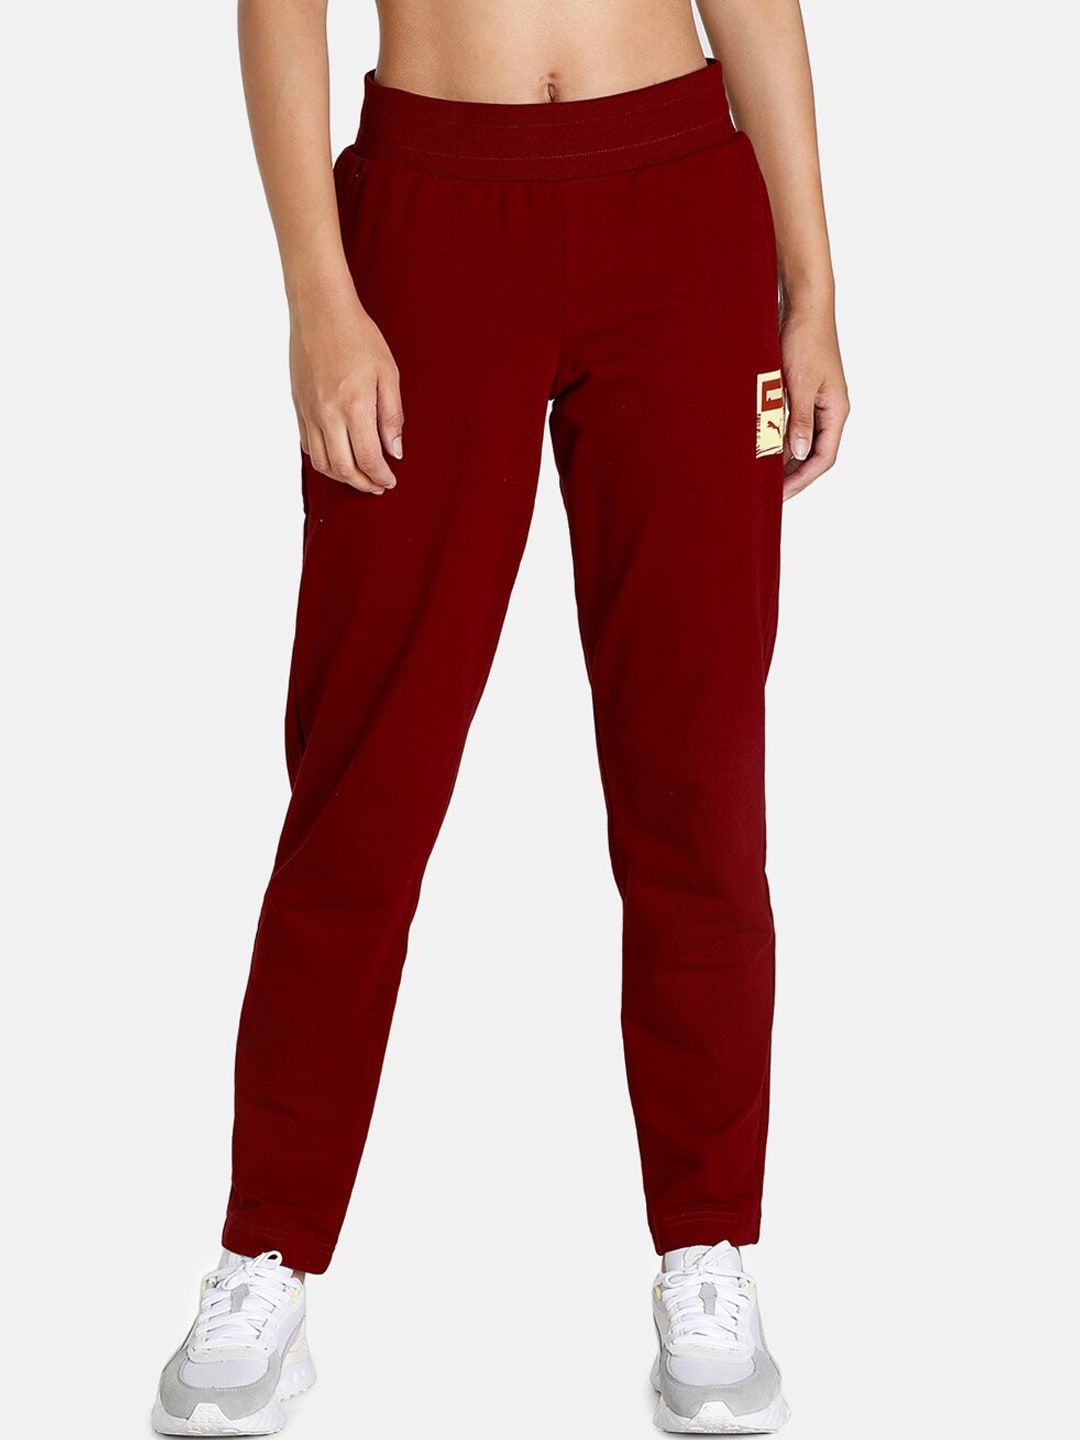 Puma Woman Red Track Pants Price in India